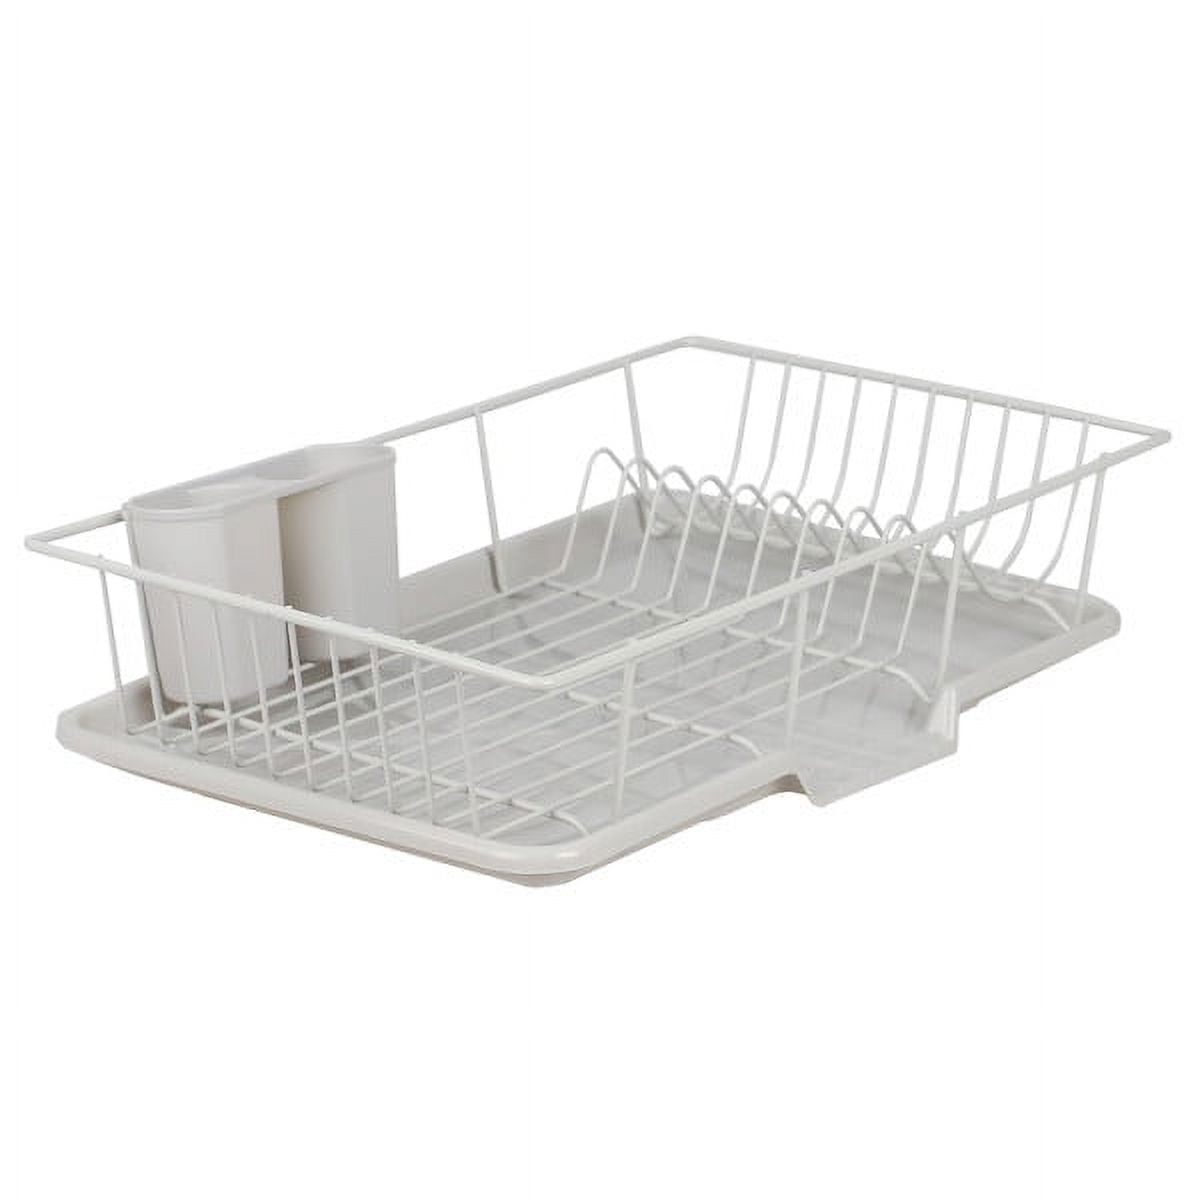 Oakware - Lily Dish Rack - Stainless Steel - Never Rust - Home Size